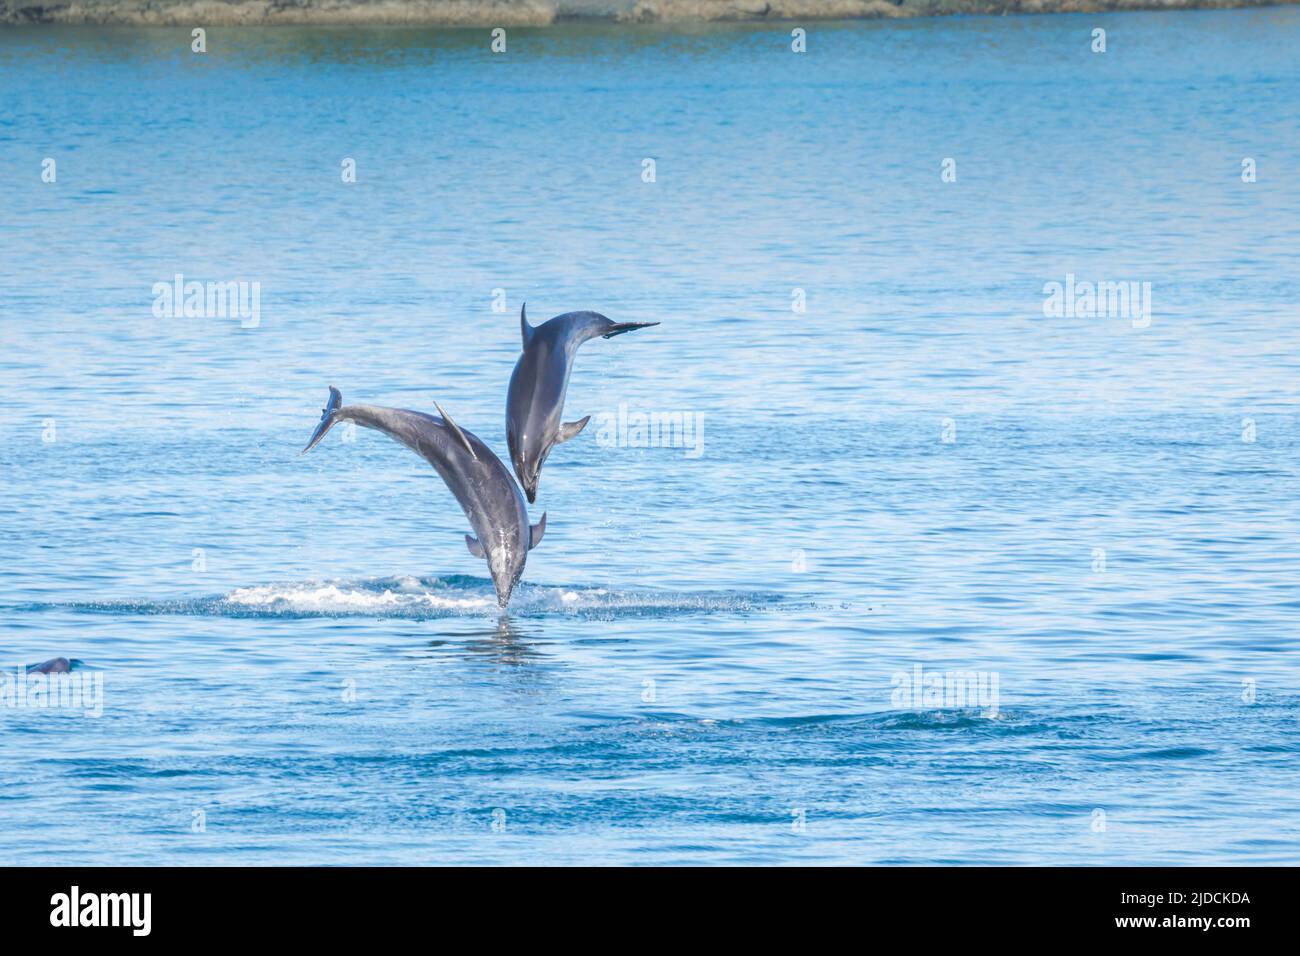 Bottlenose Dolphin ( Tursiops truncatus ) New Zealand is their southern most point in their range. New Zealand has 3 main populations, this leaping pa Stock Photo